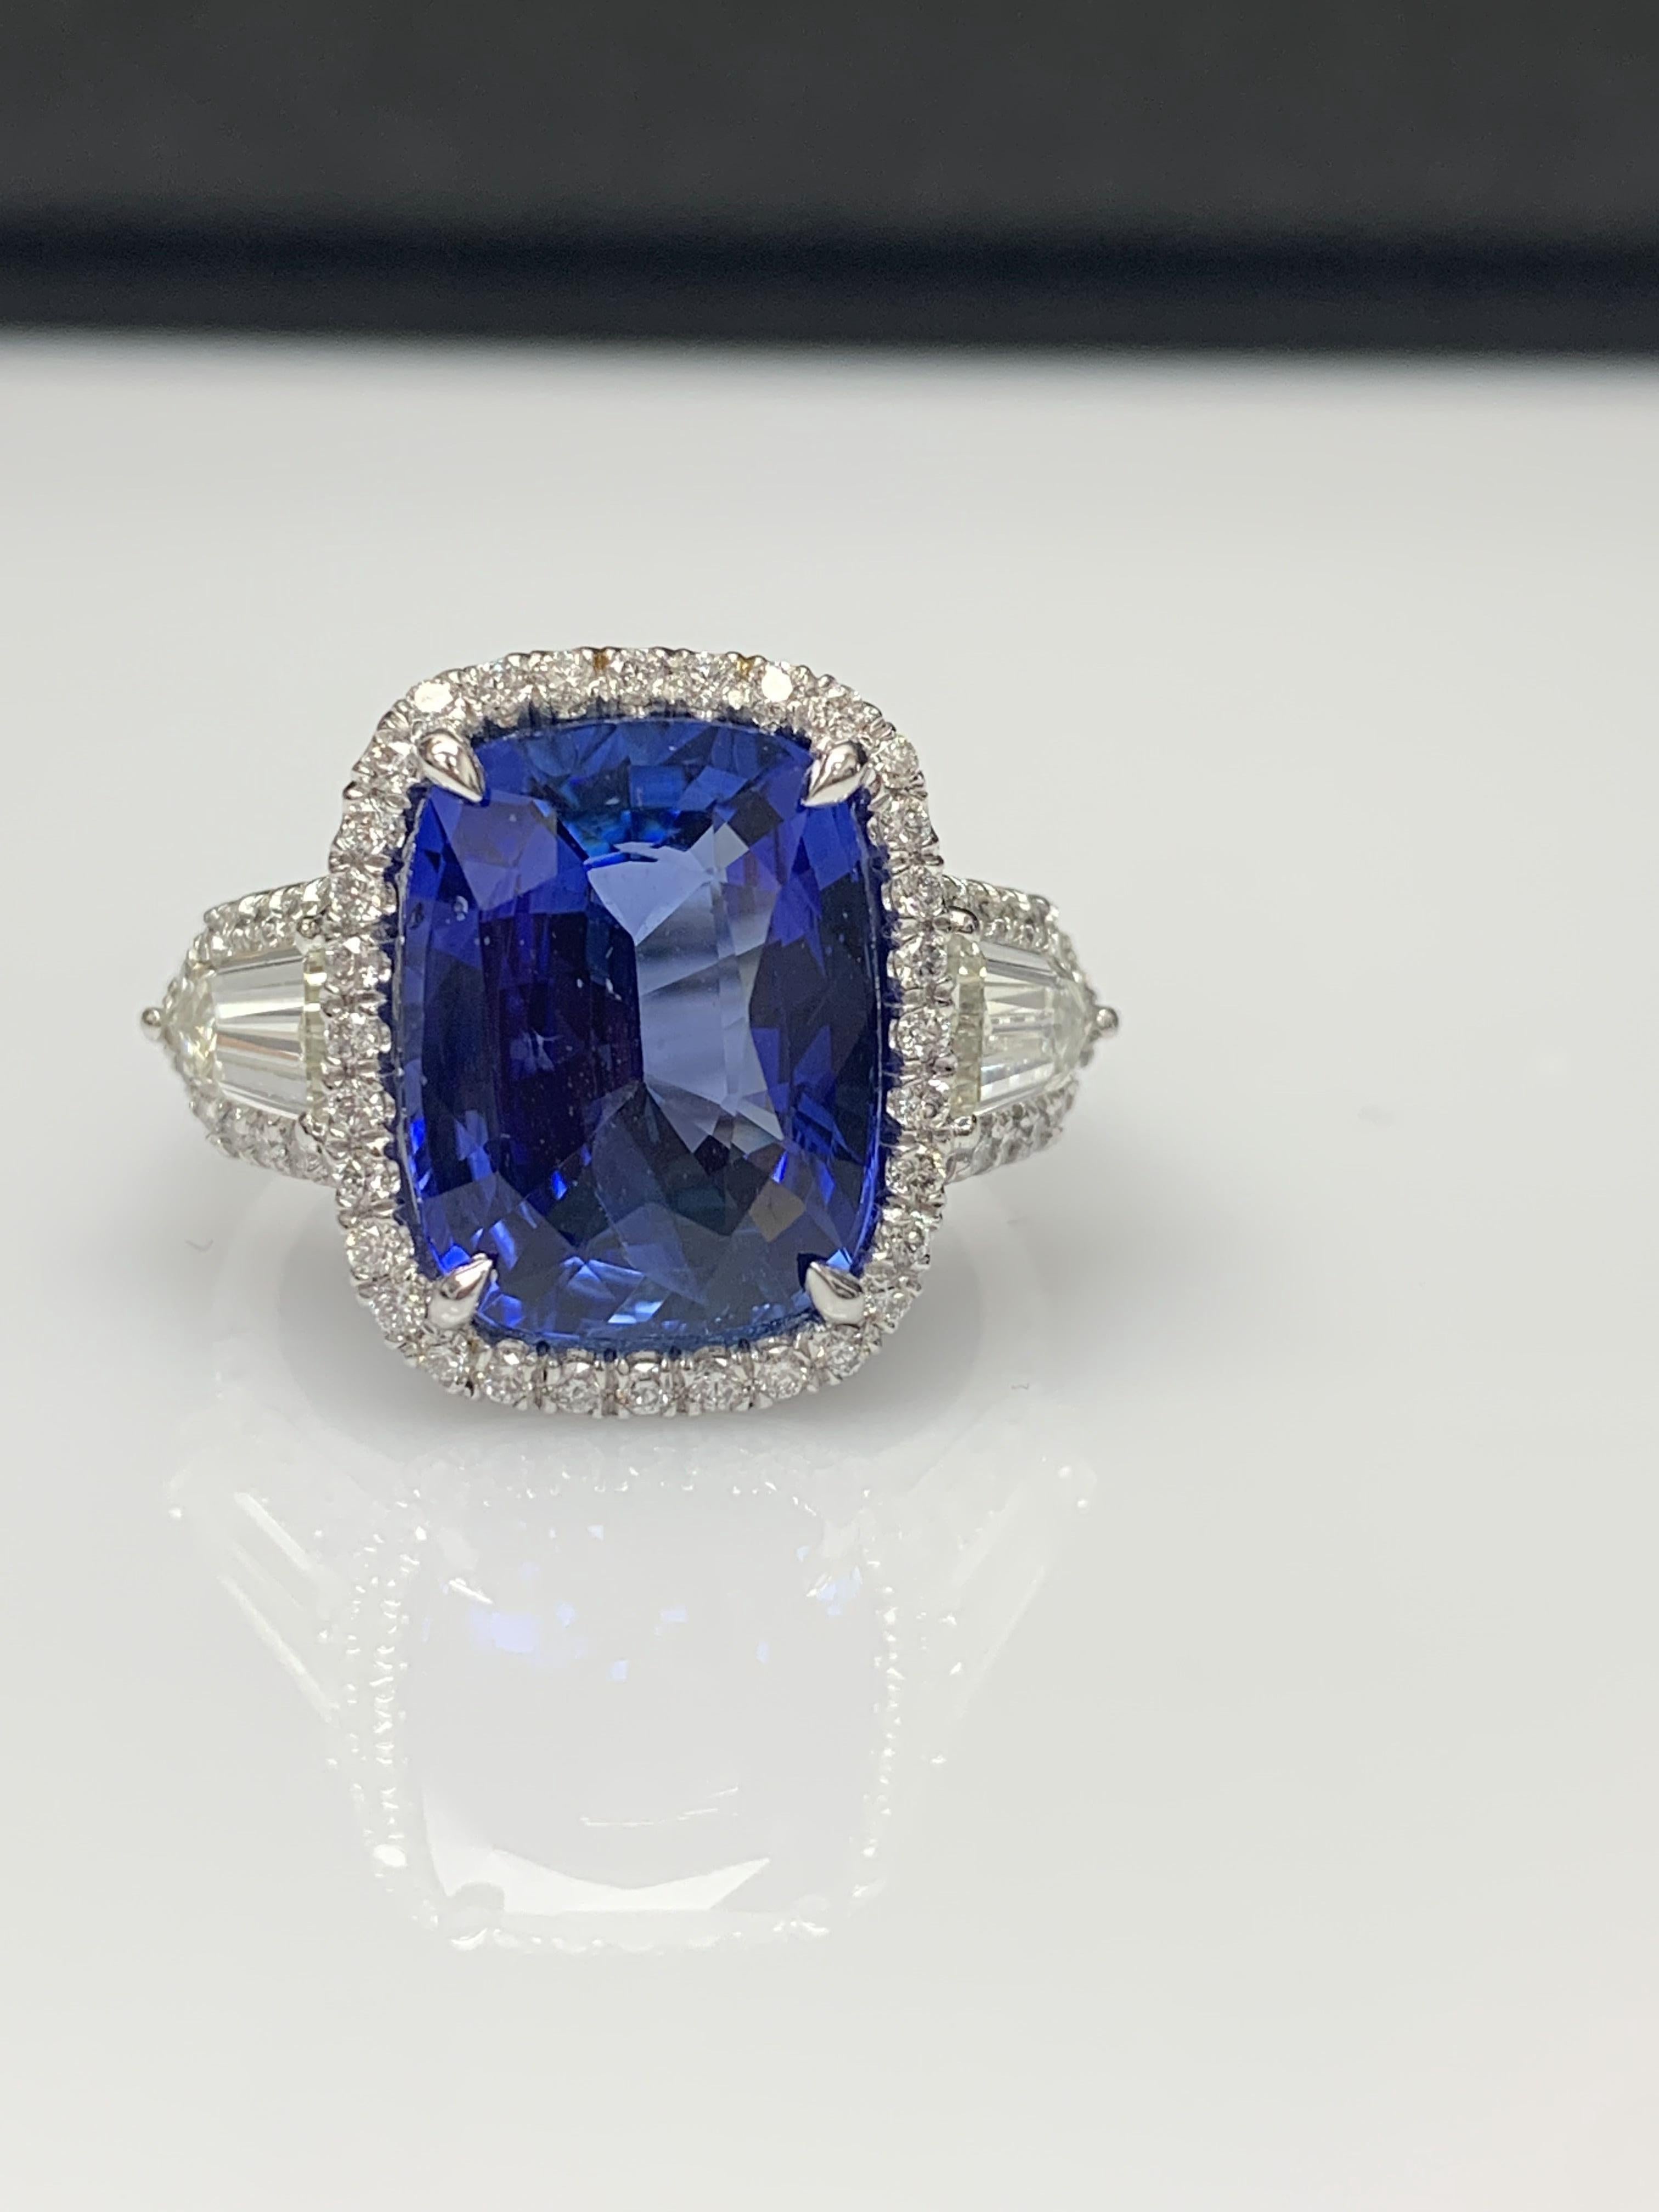 Women's 7.51 Carat Cushion Cut Sapphire and Diamond Engagement Ring in Platinum For Sale